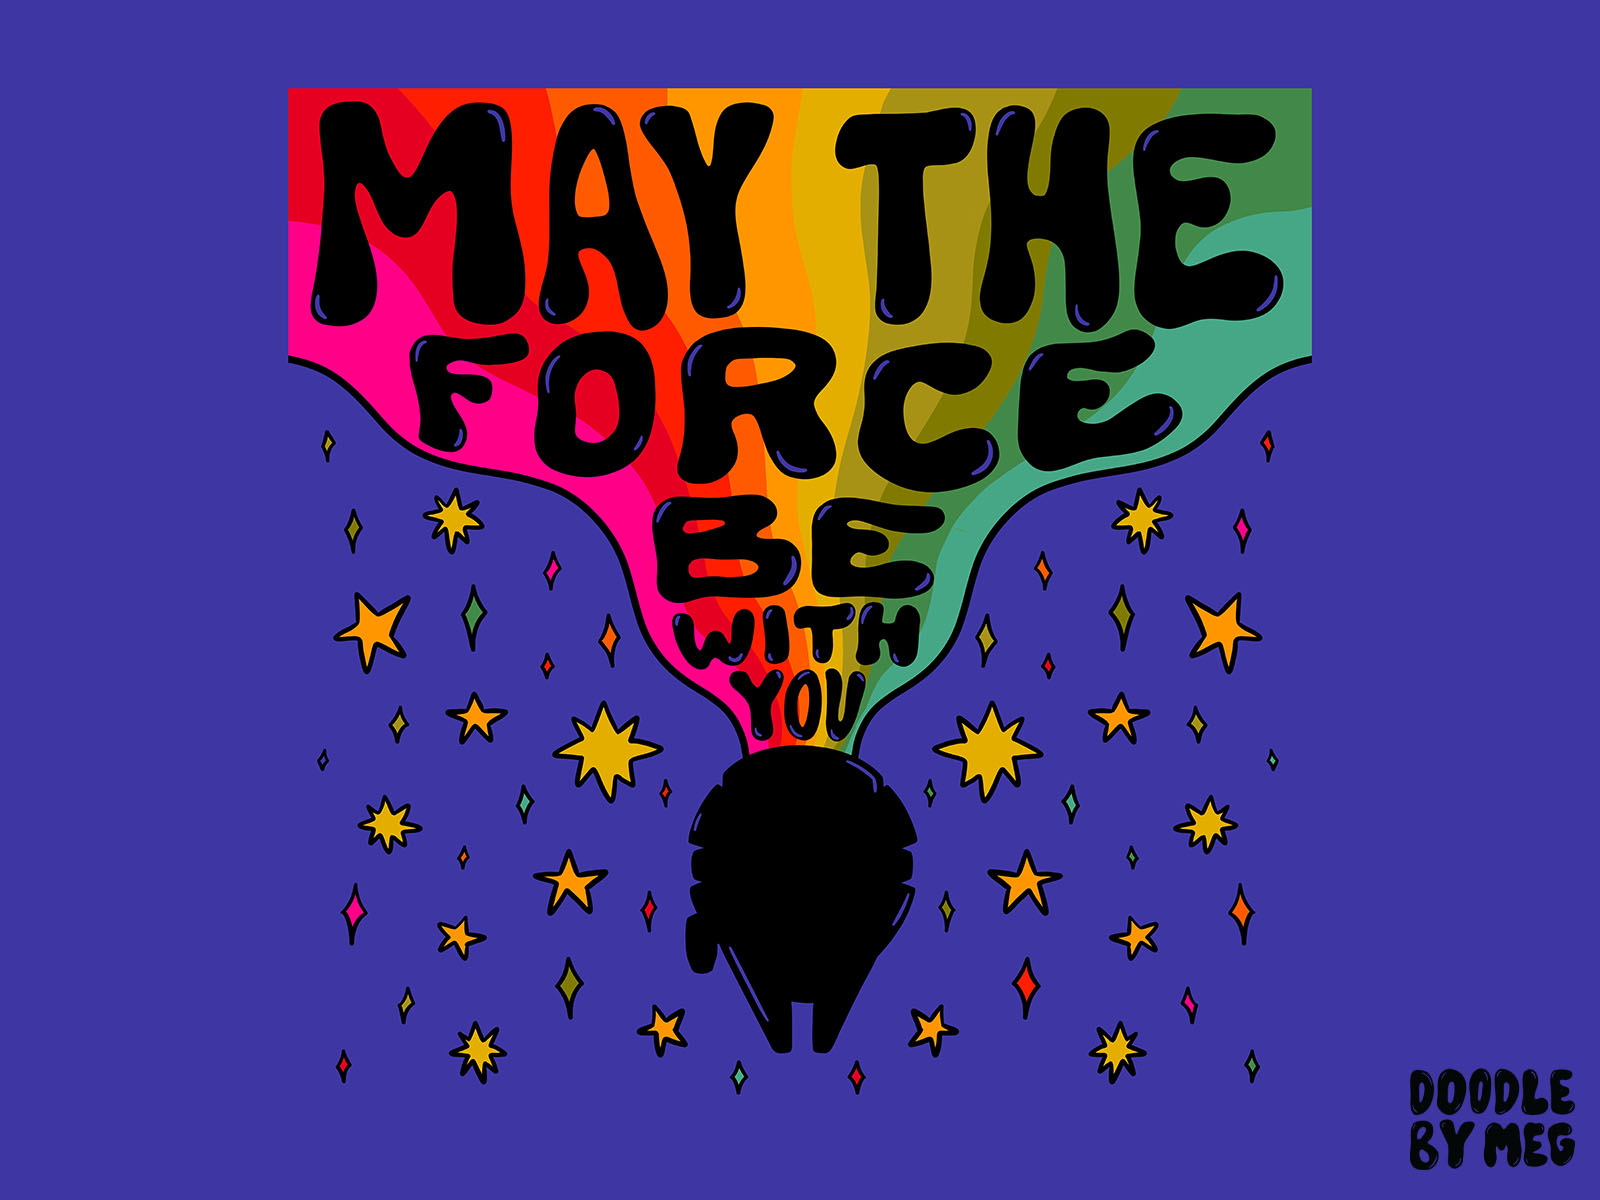 May the 4th be with you - Qui-Gon Jinn by Loy Iver on Dribbble